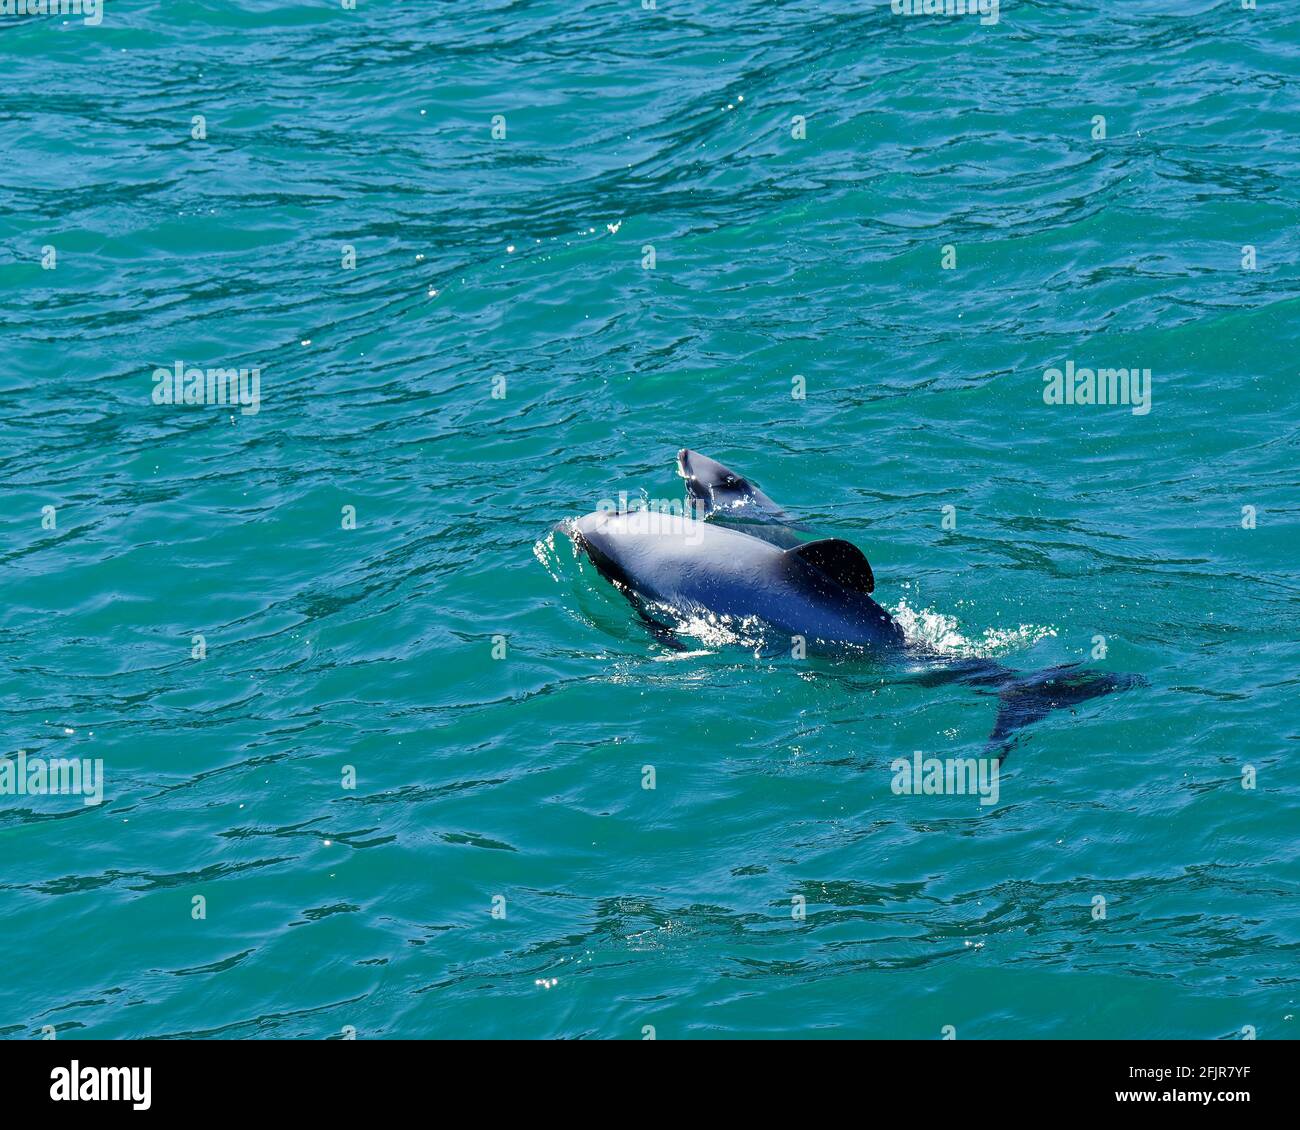 Hectors dolphins, mother and baby calf about 18 months old, endangered dolphin, New Zealand. Cetacean endemic to New Zealand. Stock Photo